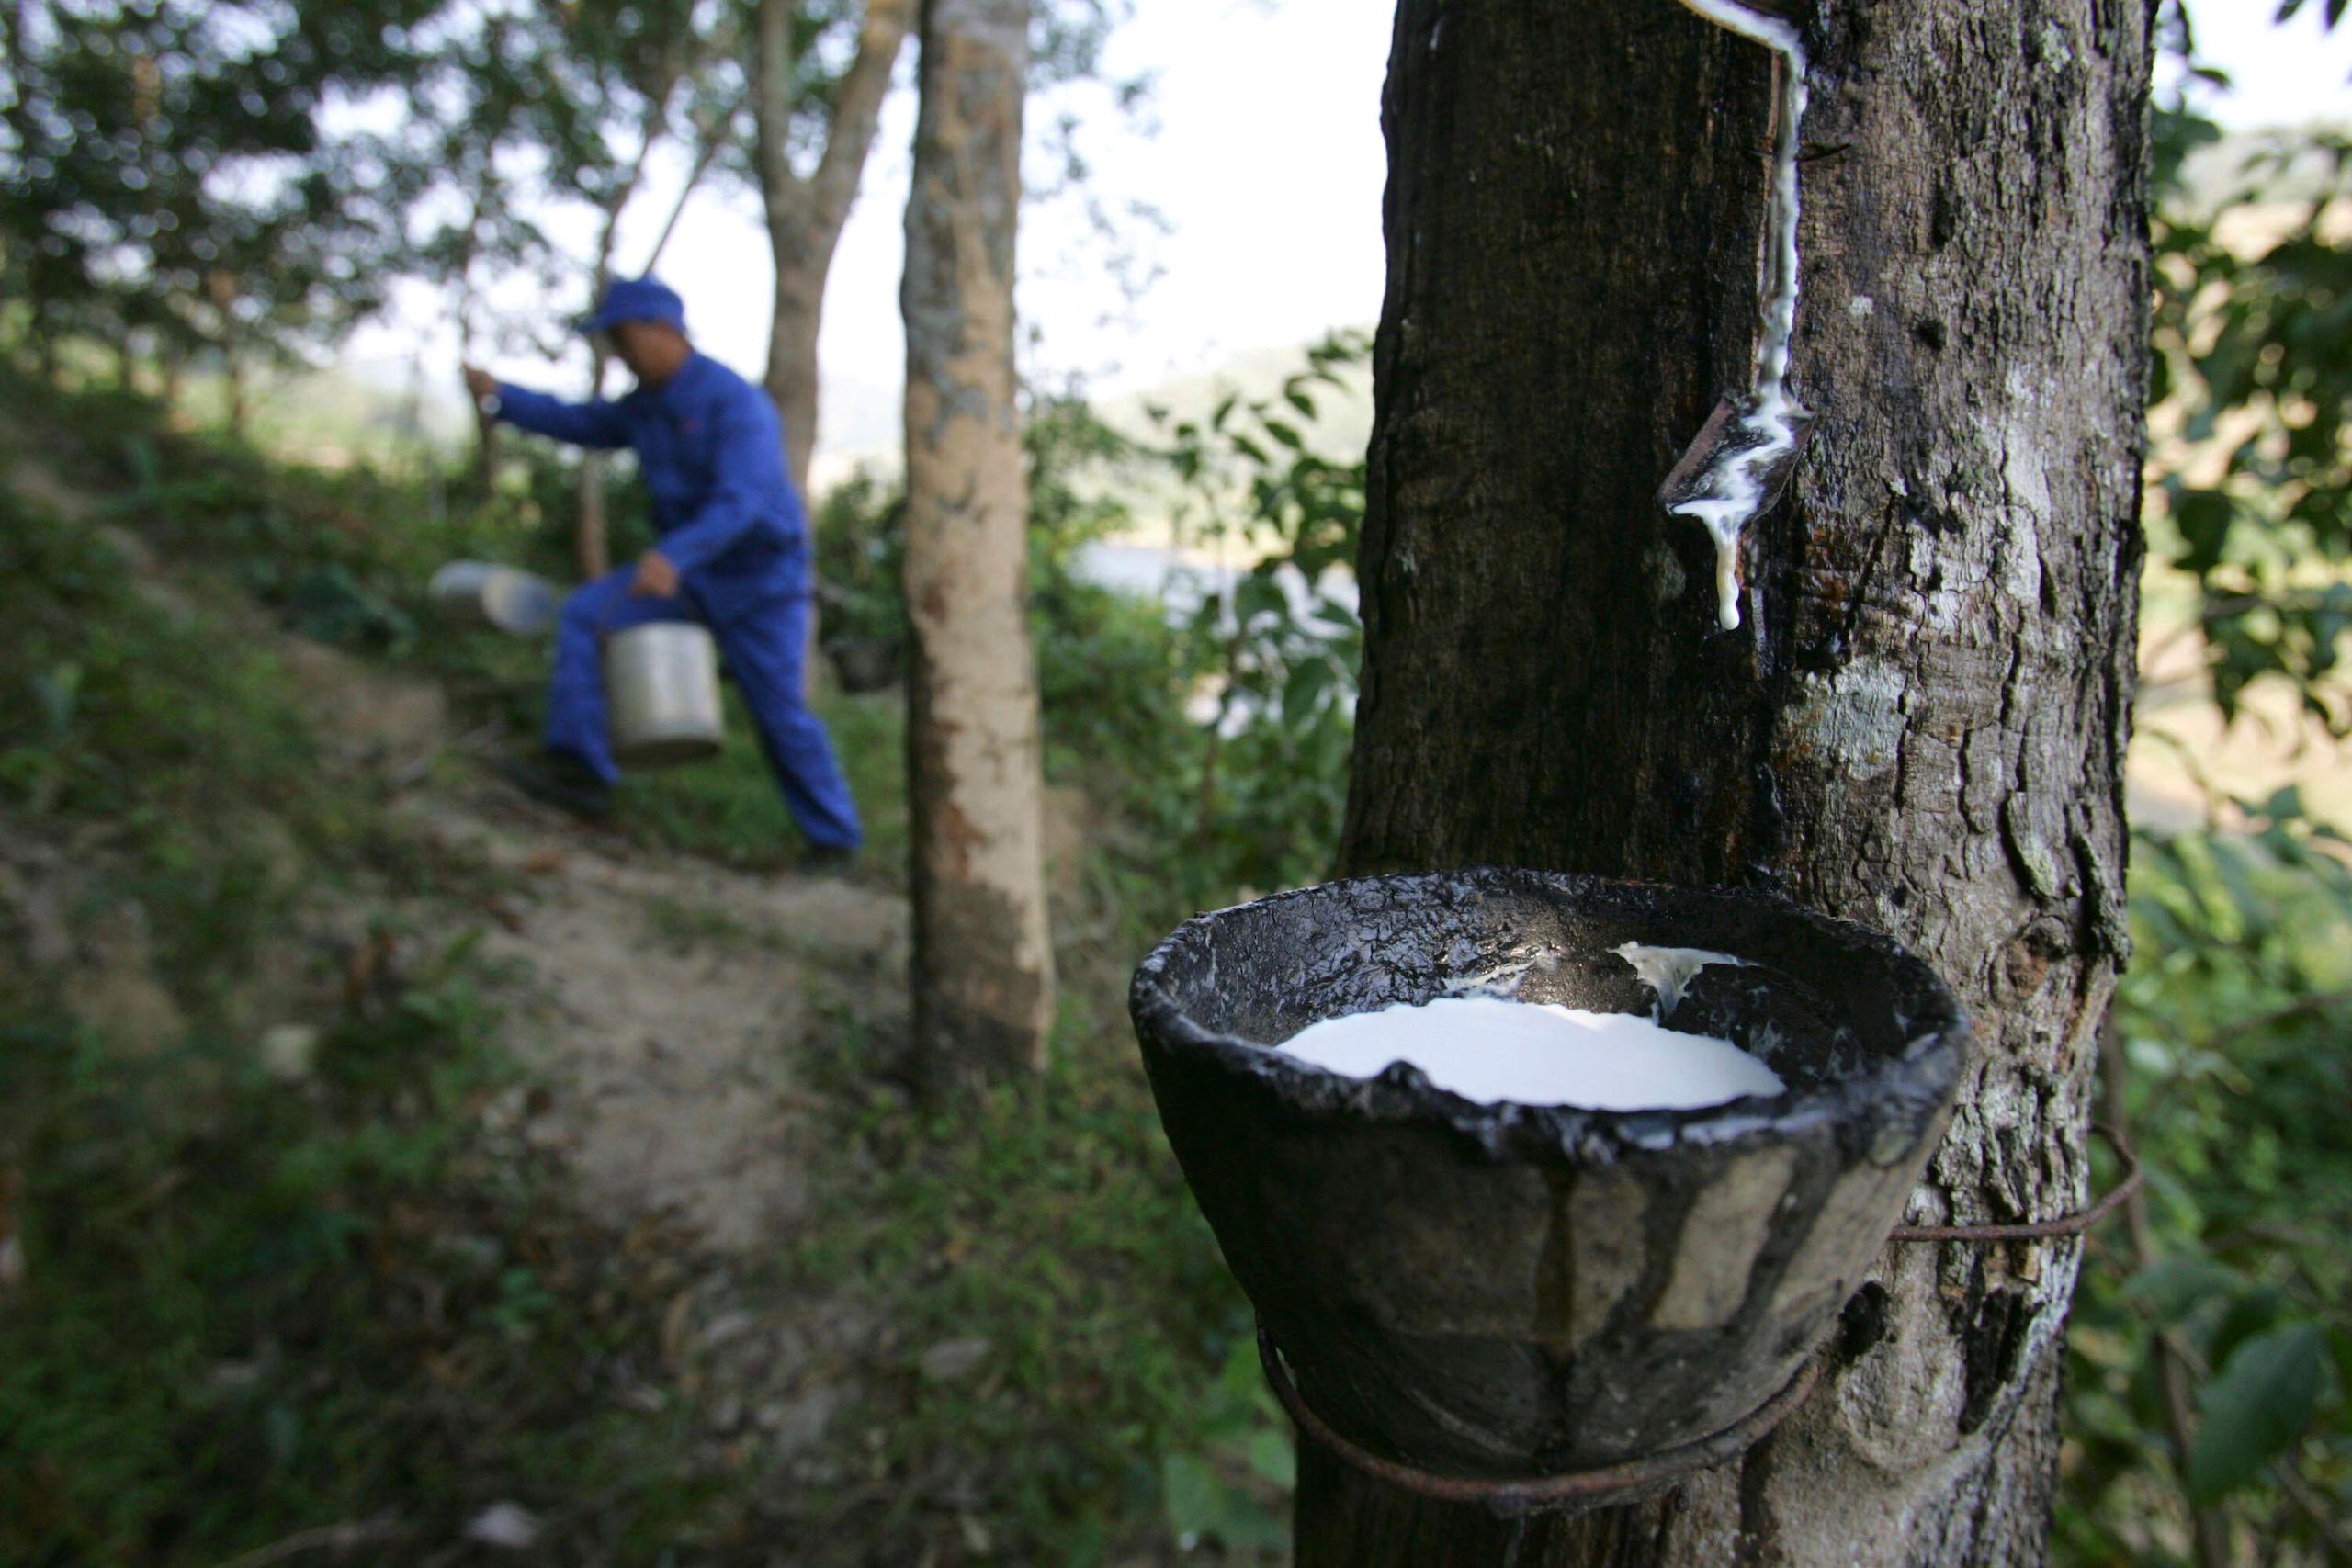 The Origins of Rubber and the Case for Sustainability